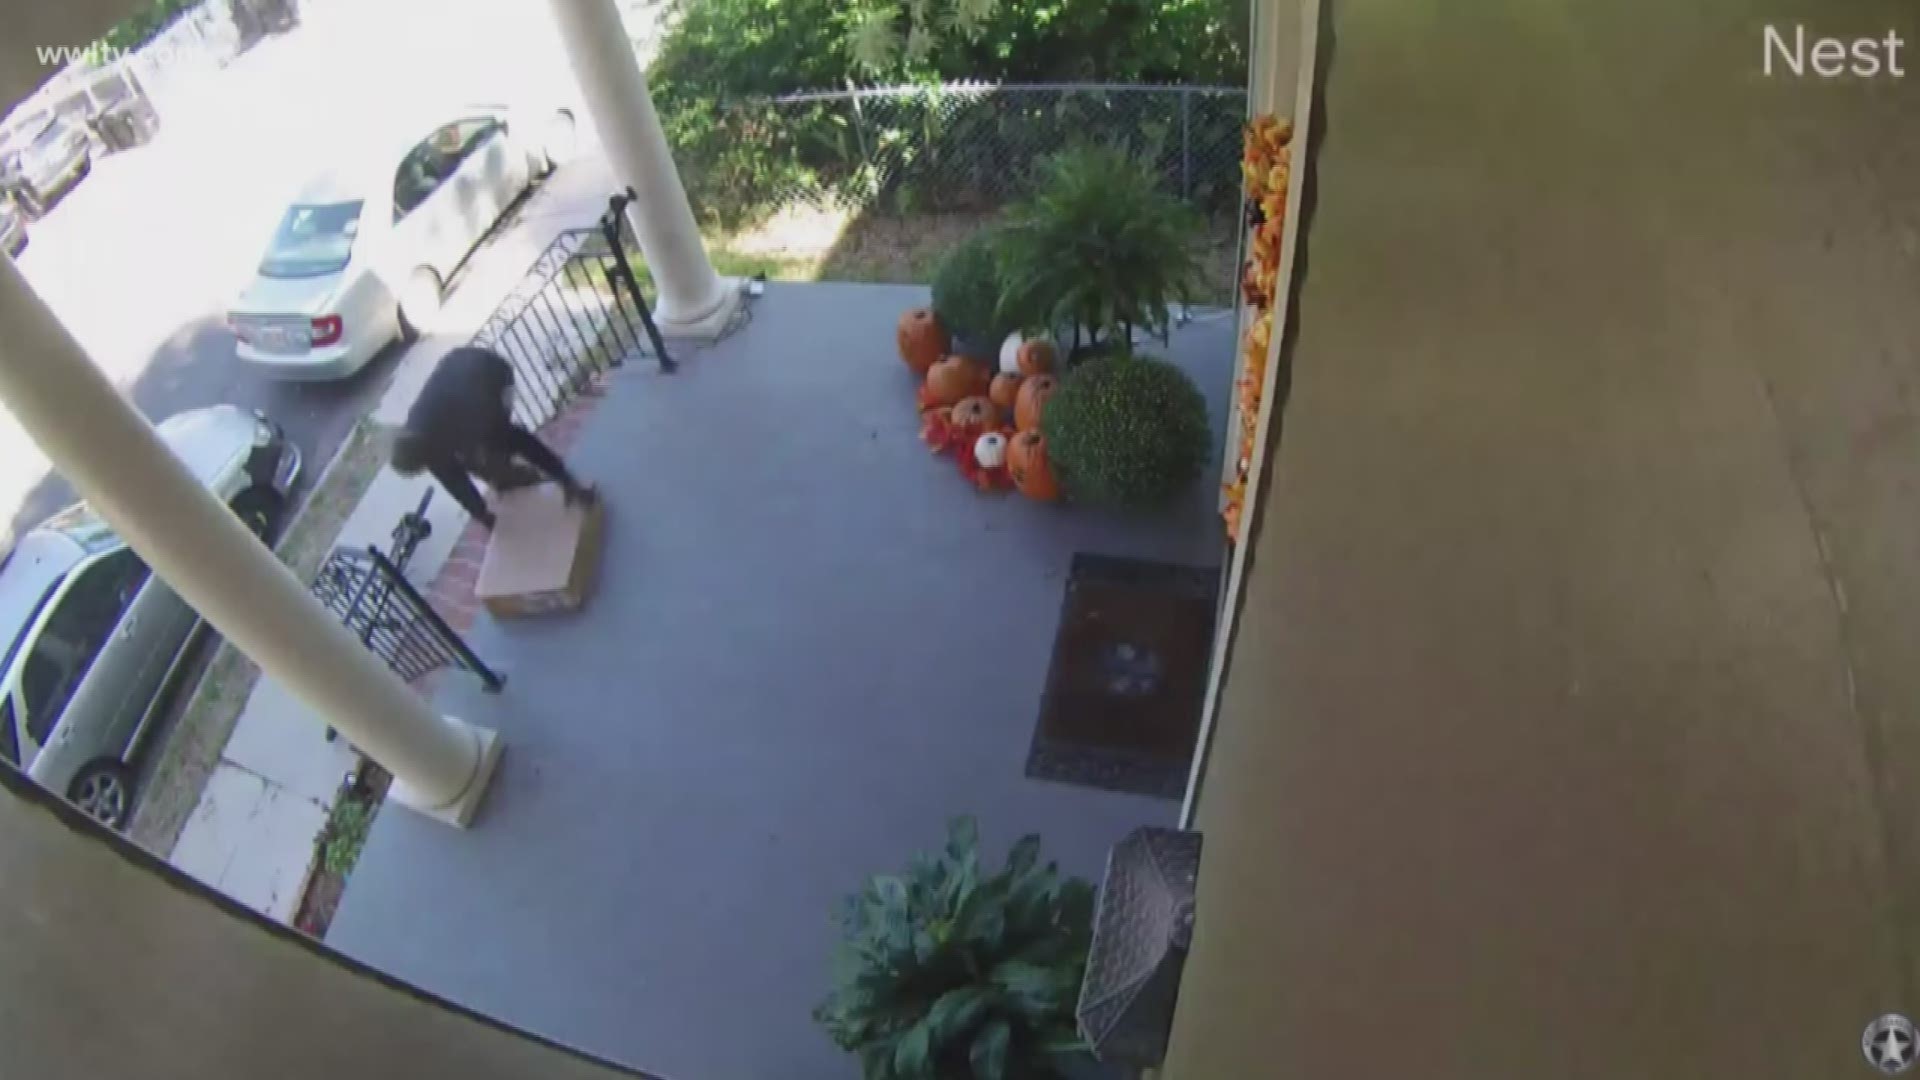 A new study reports nearly 40 percent of consumers have been victims of package theft, and holiday shoppers in Louisiana are the fourth most at risk in the U.S.